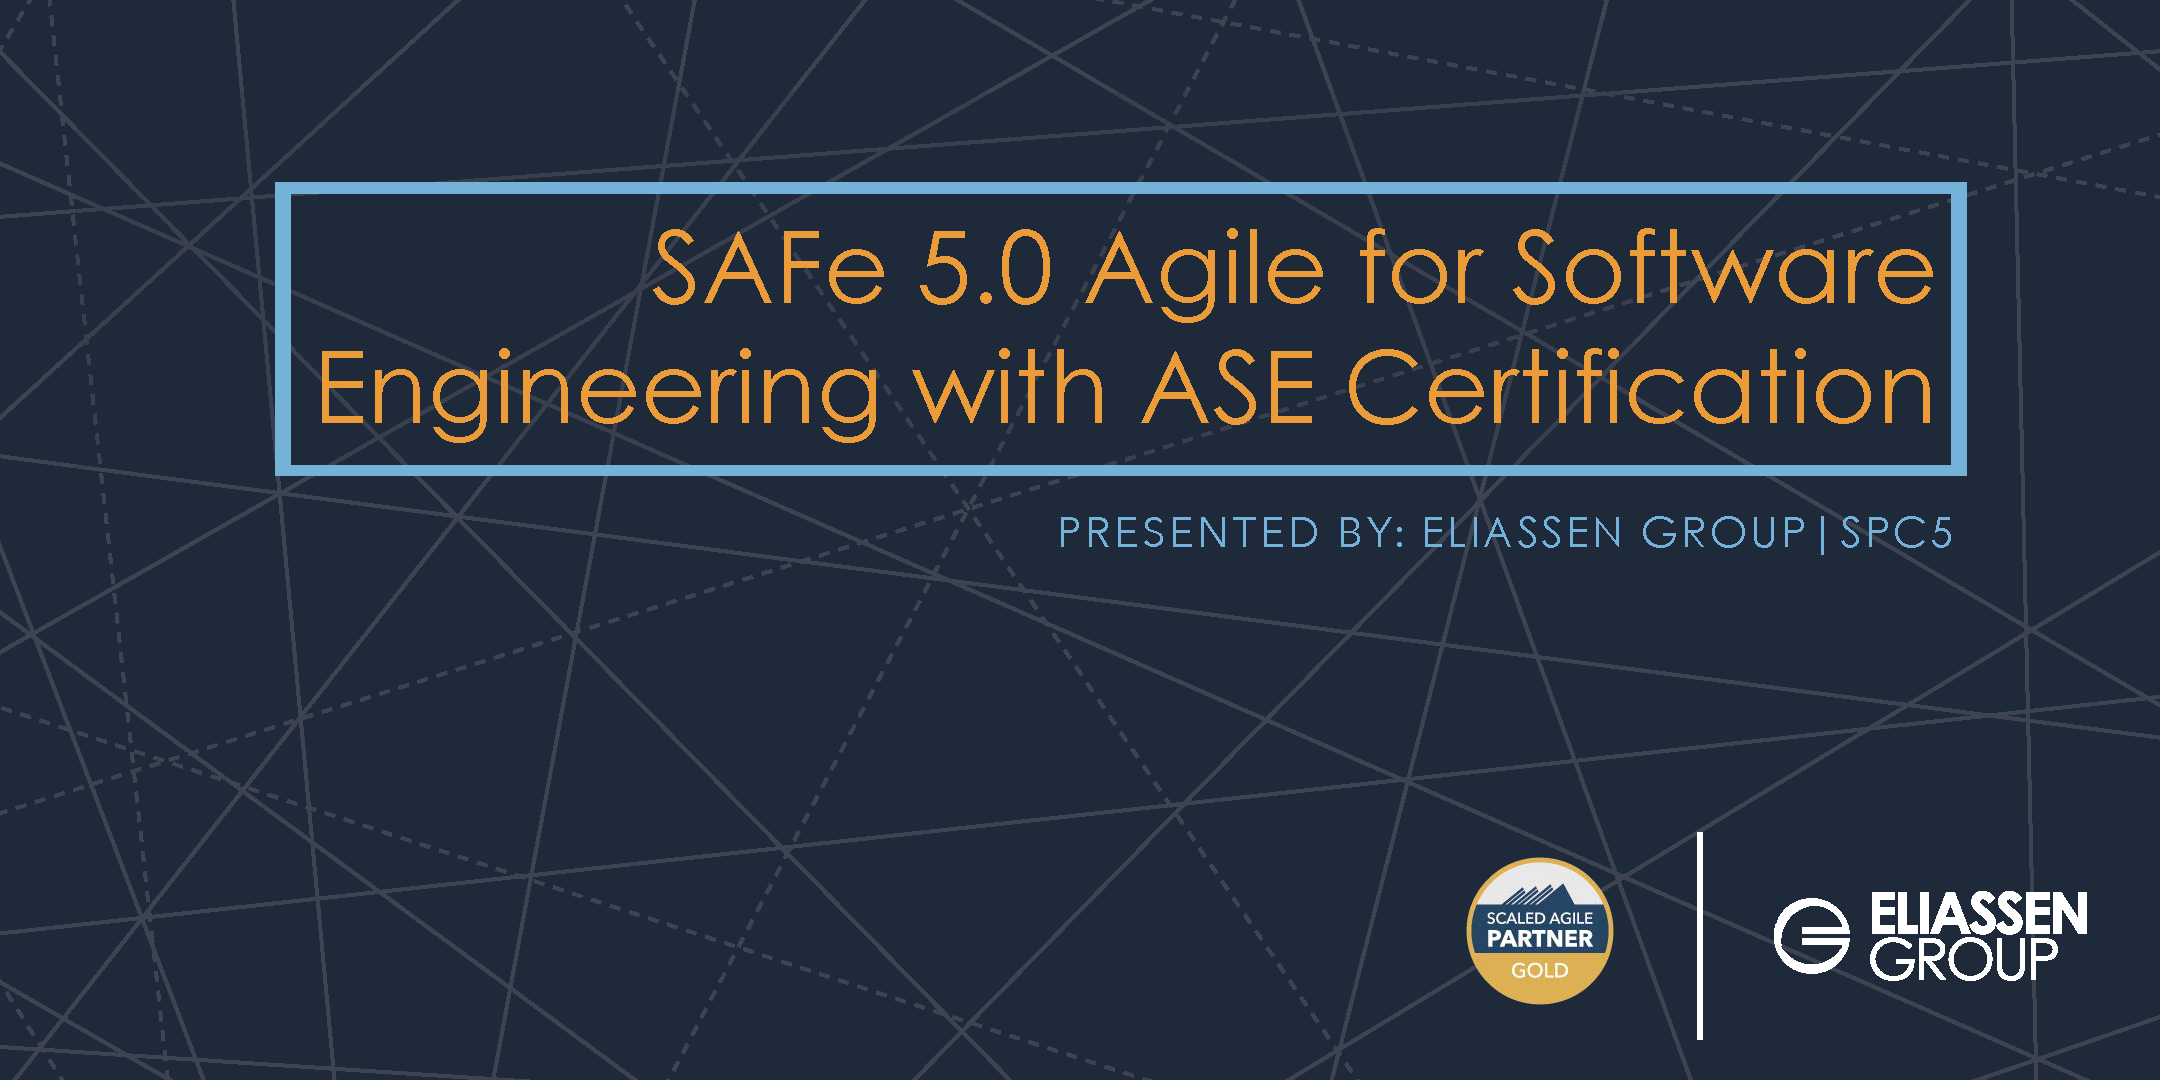 REMOTE DELIVERY - SAFe 5.0 Agile for Software Engineering with ASE Certification - New York City - June